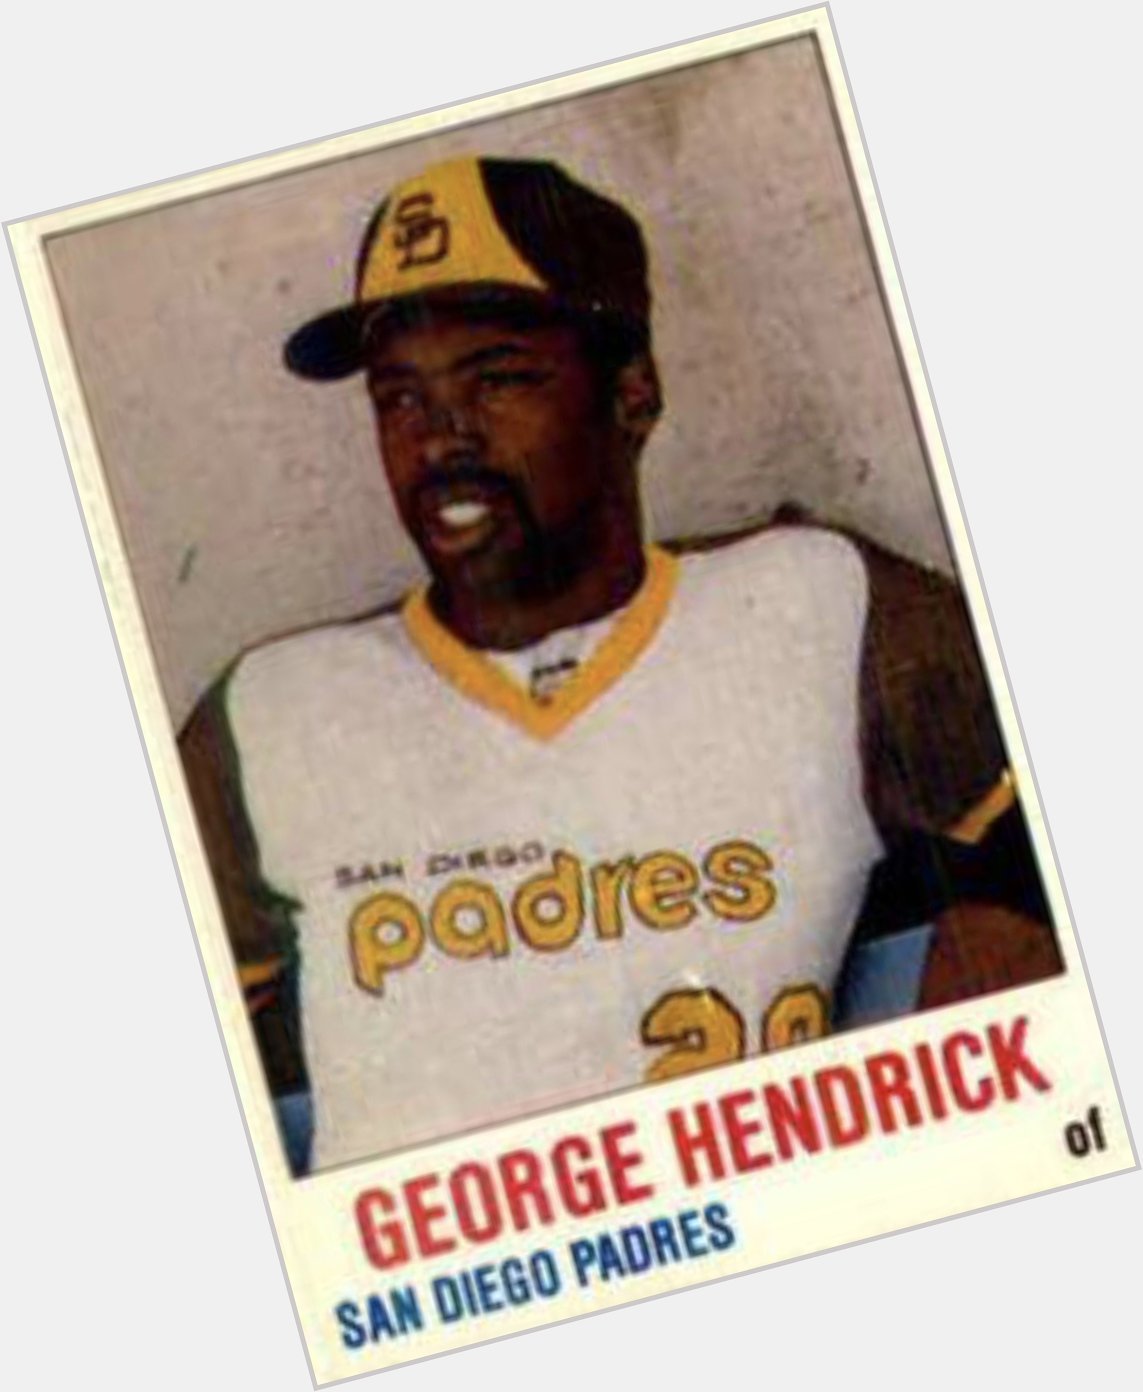 A Happy Birthday to former Outfielder George Hendrick 